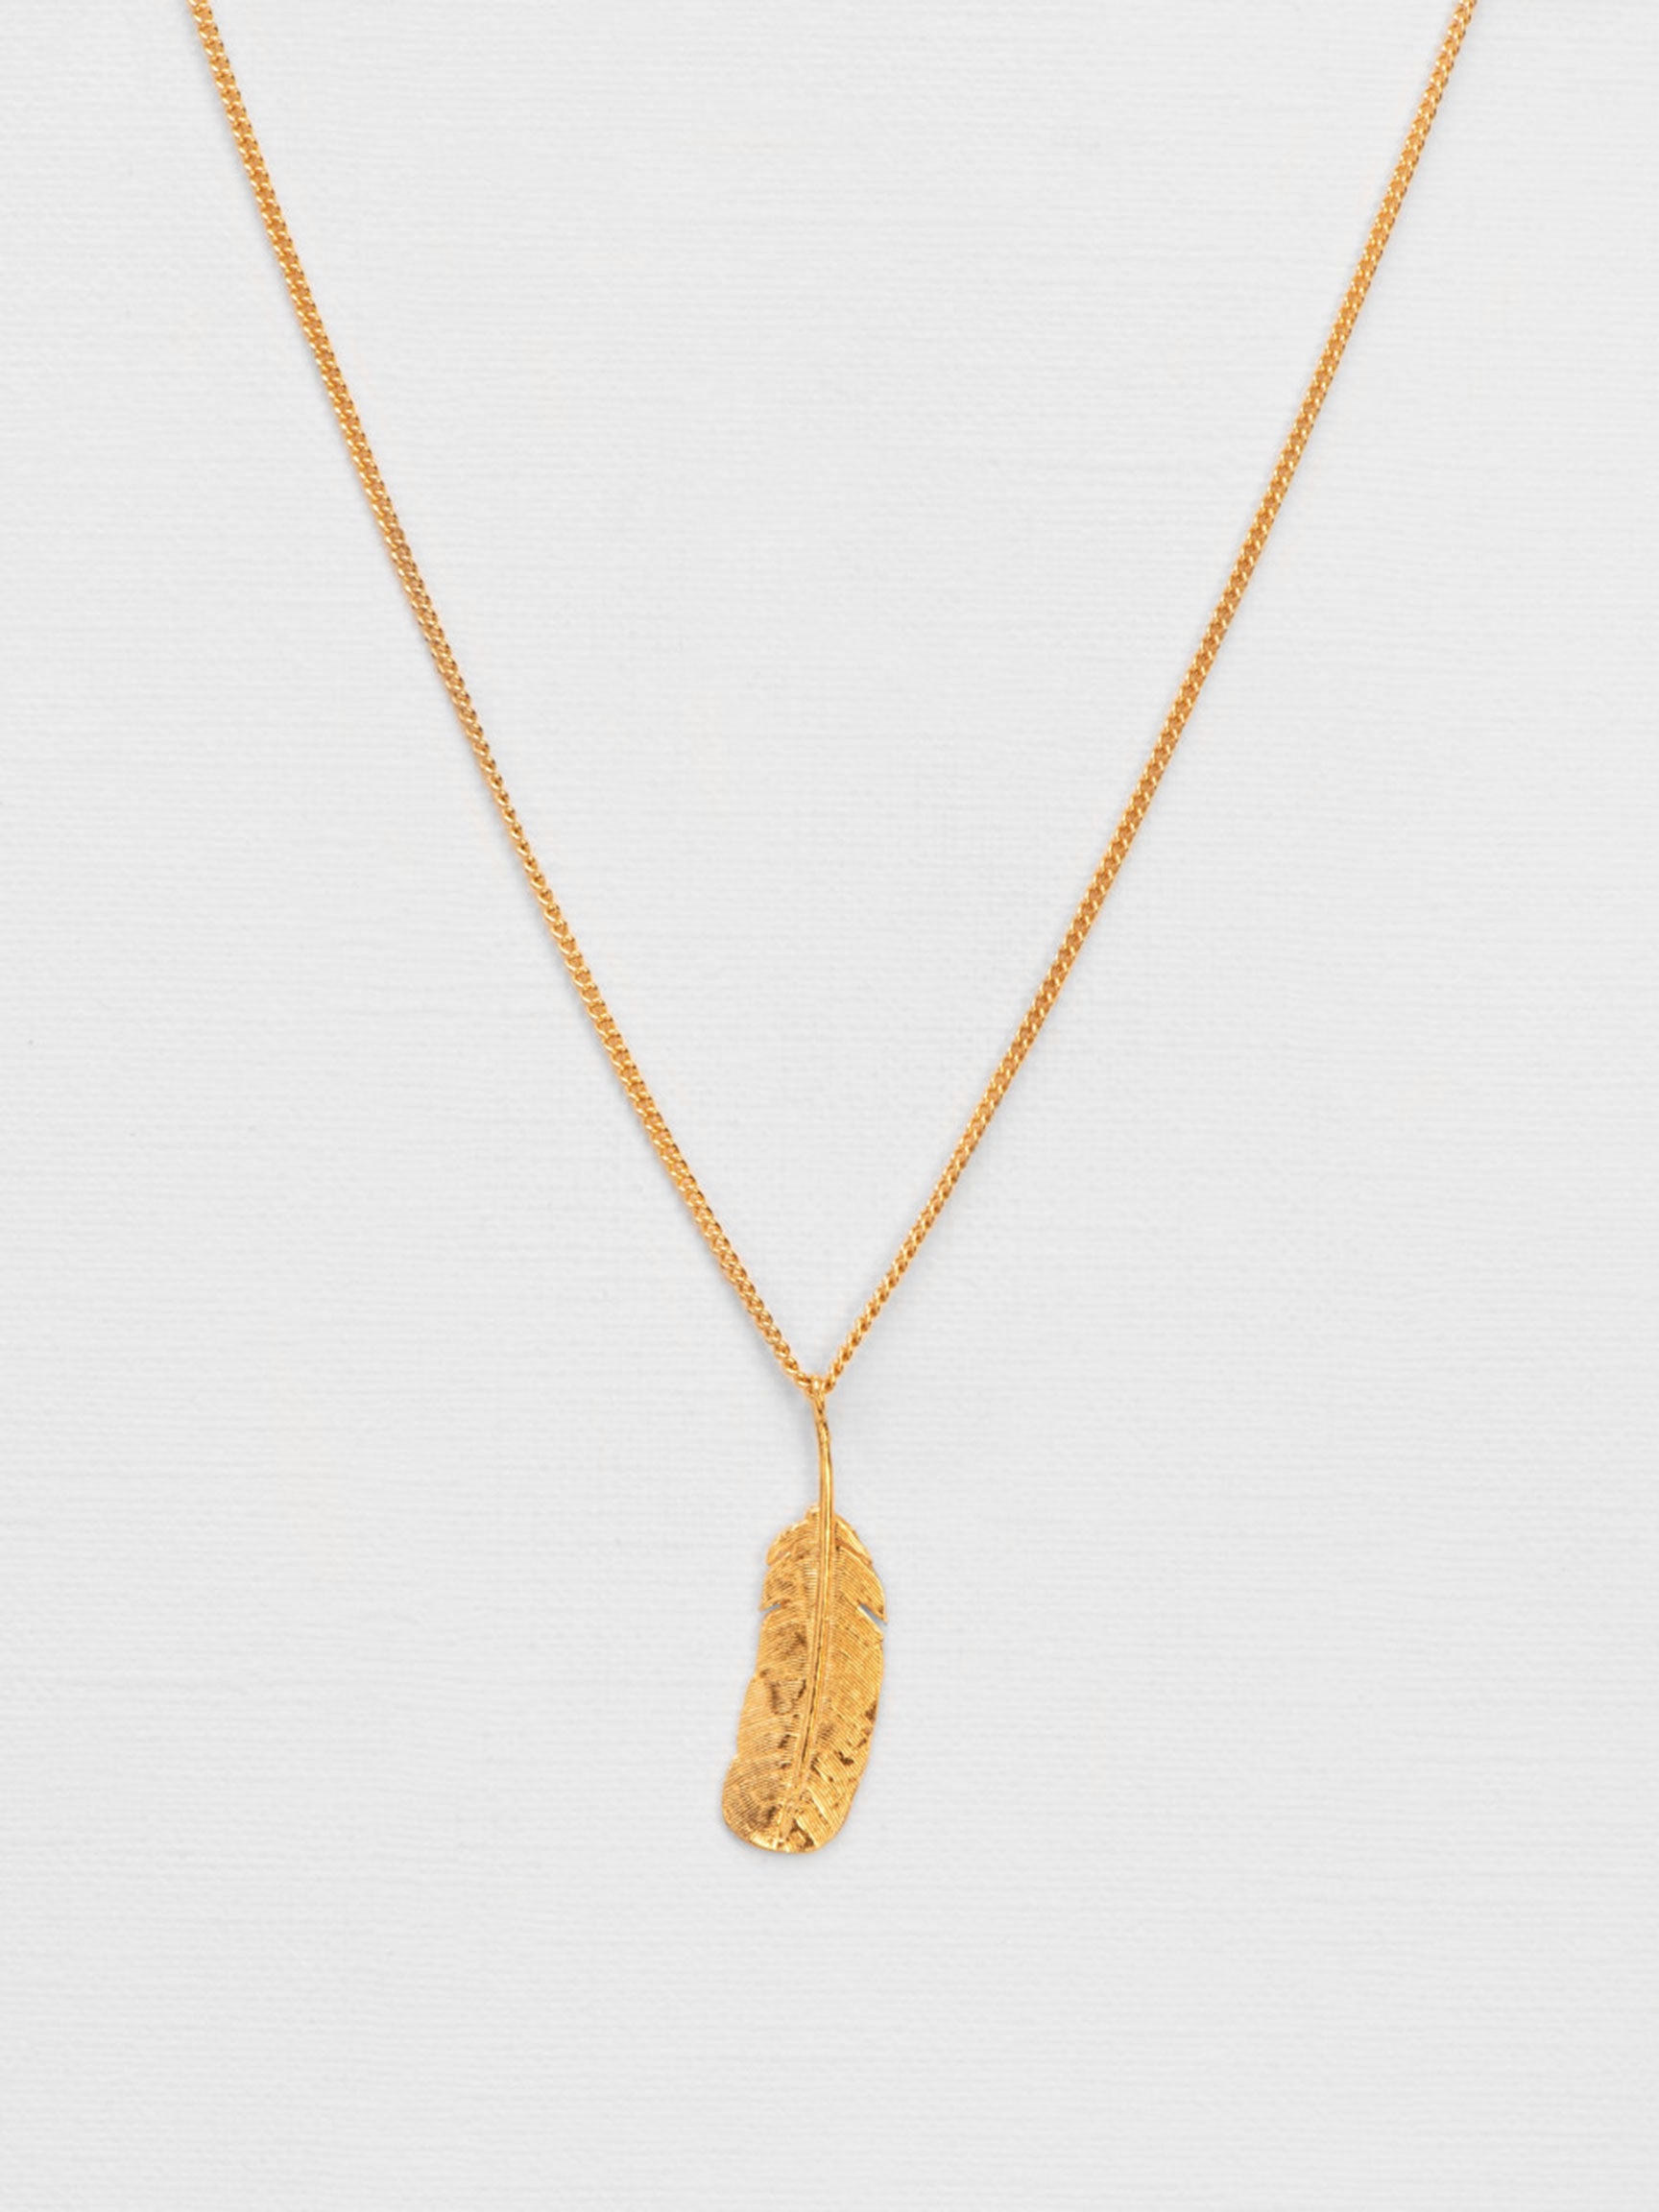 Goldplated Short Necklace with Feather Pendant